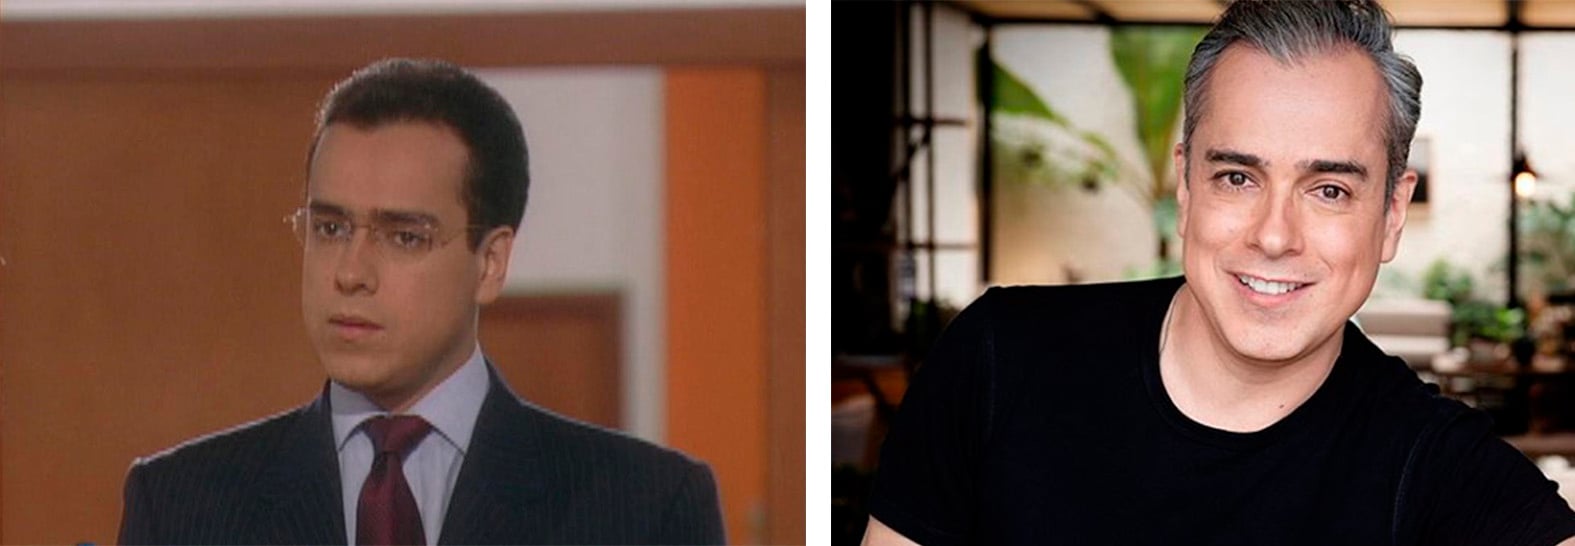 Comparative image of the actor Jorge Enrique Abello in his character of Don Armando in the novel Betty la Fea